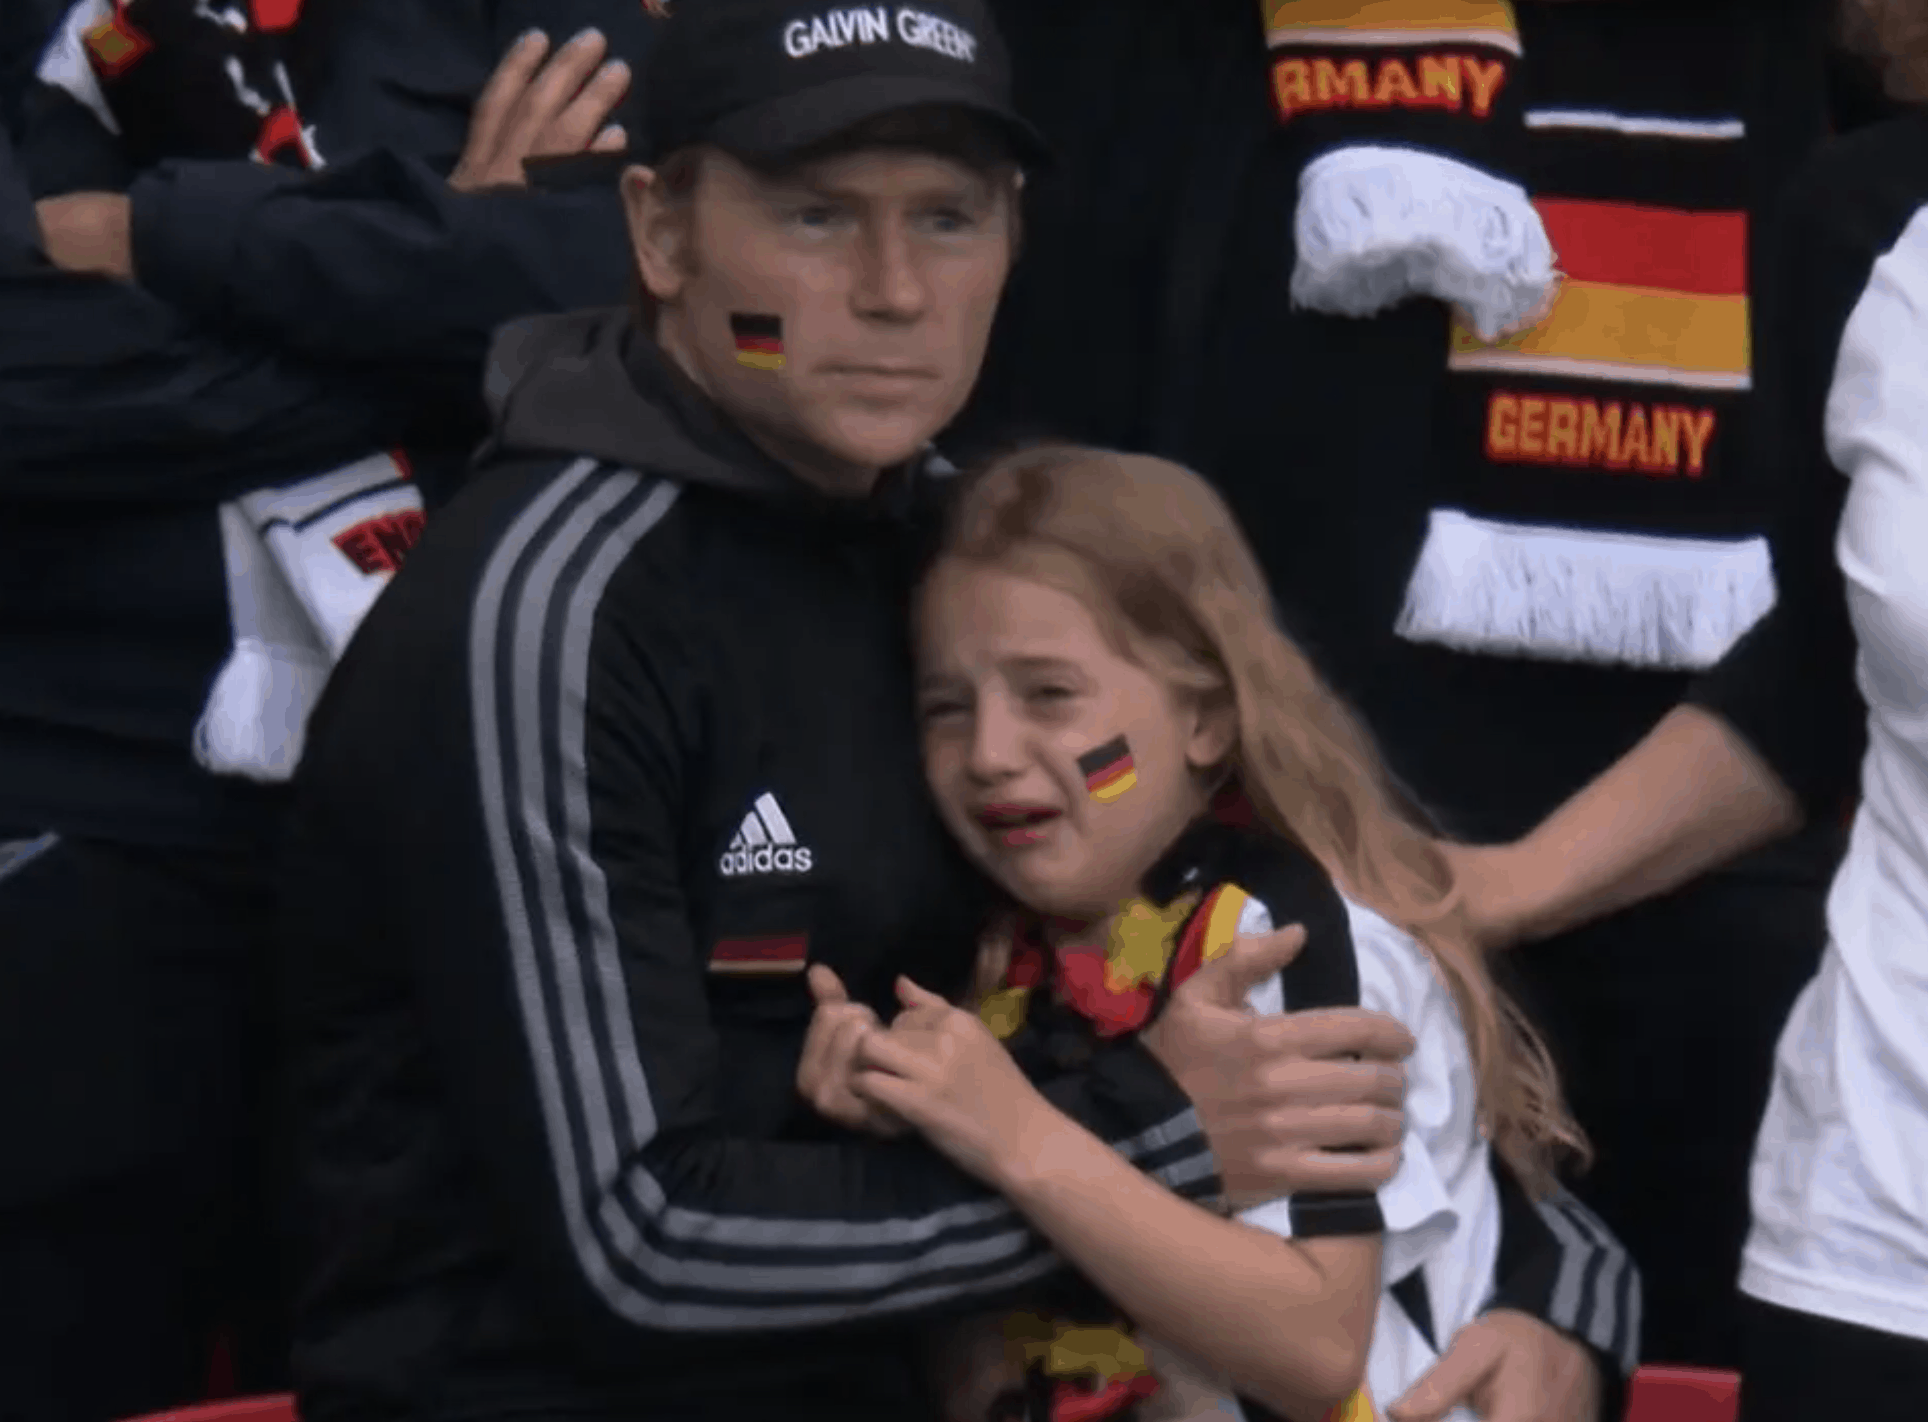 Nearly £25k raised for German girl mocked by England football fans